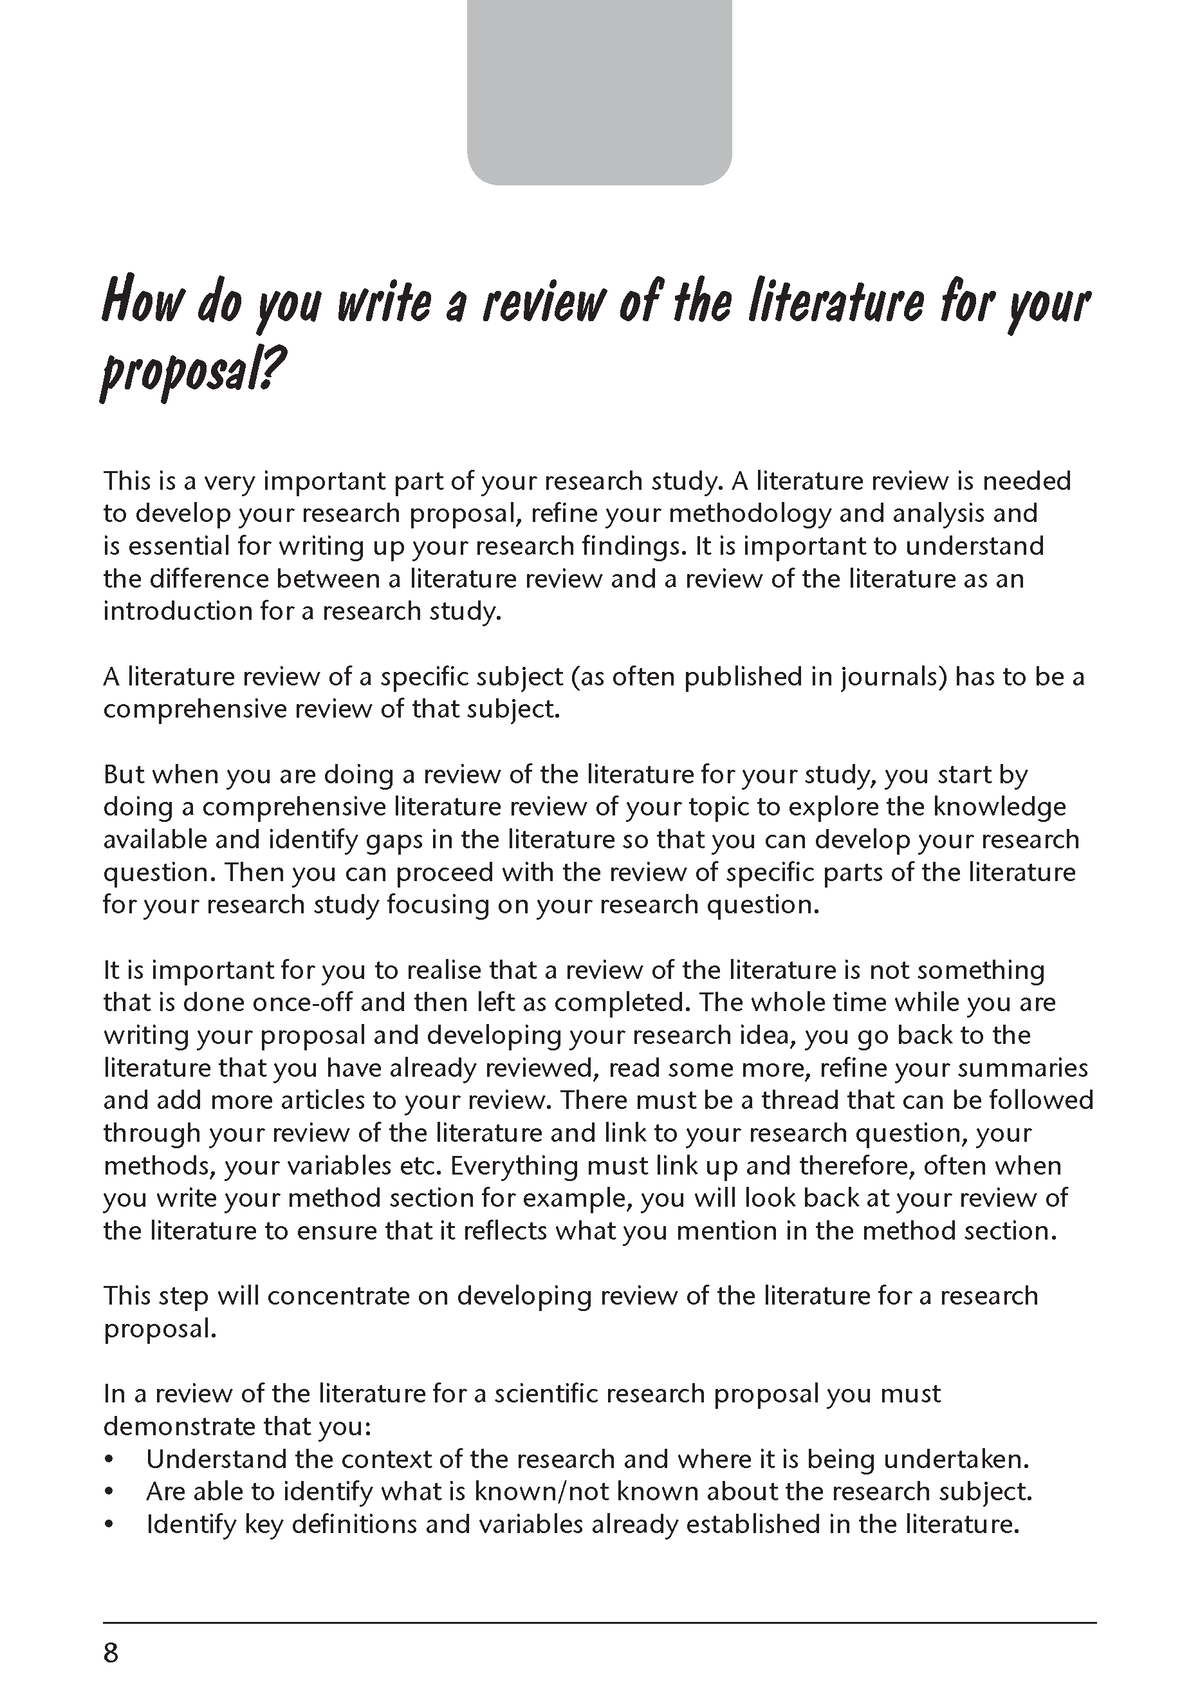 the literature review in a proposal